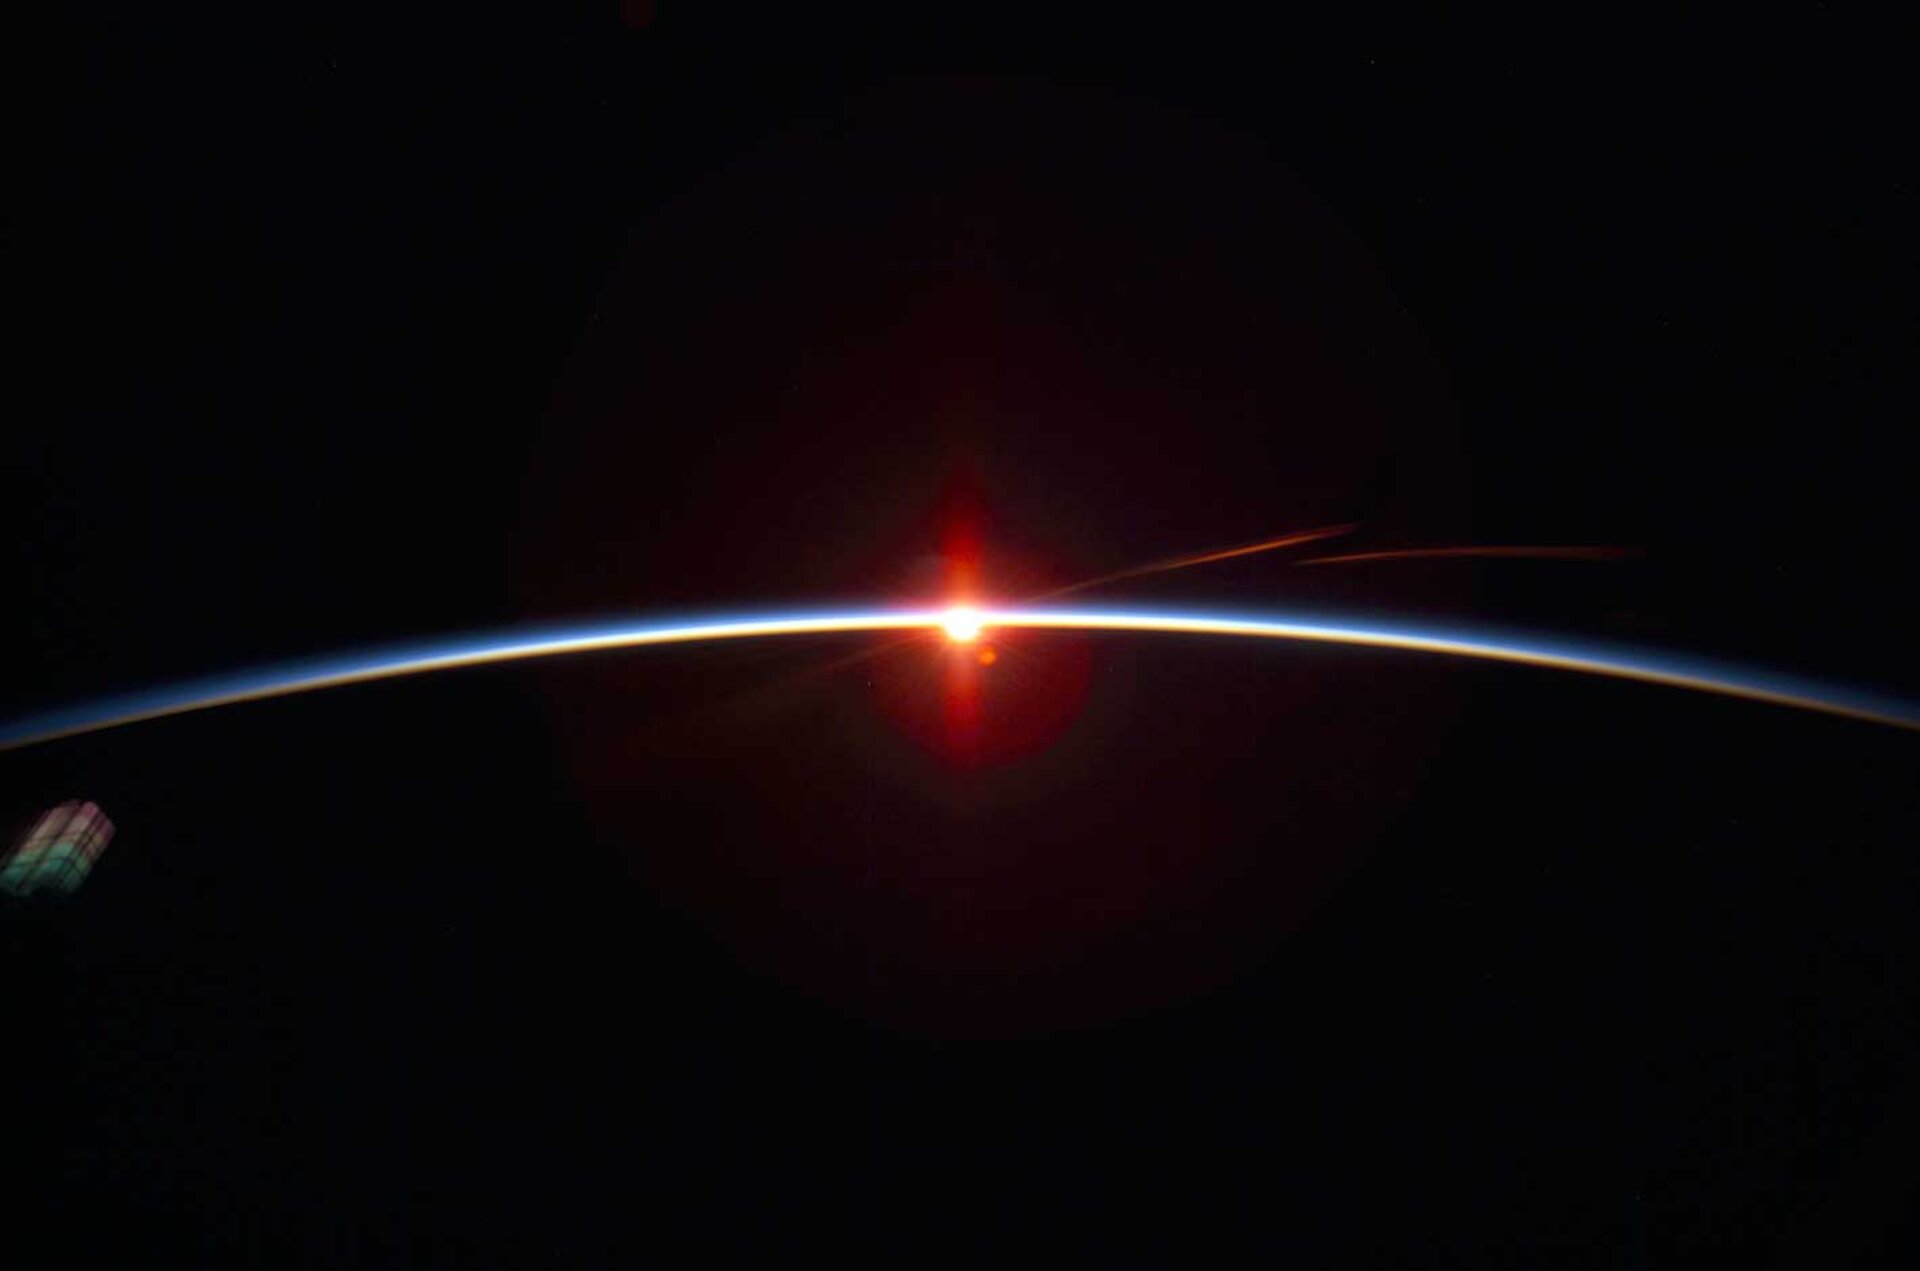 Earth's limb prior to sunrise as seen from the ISS.